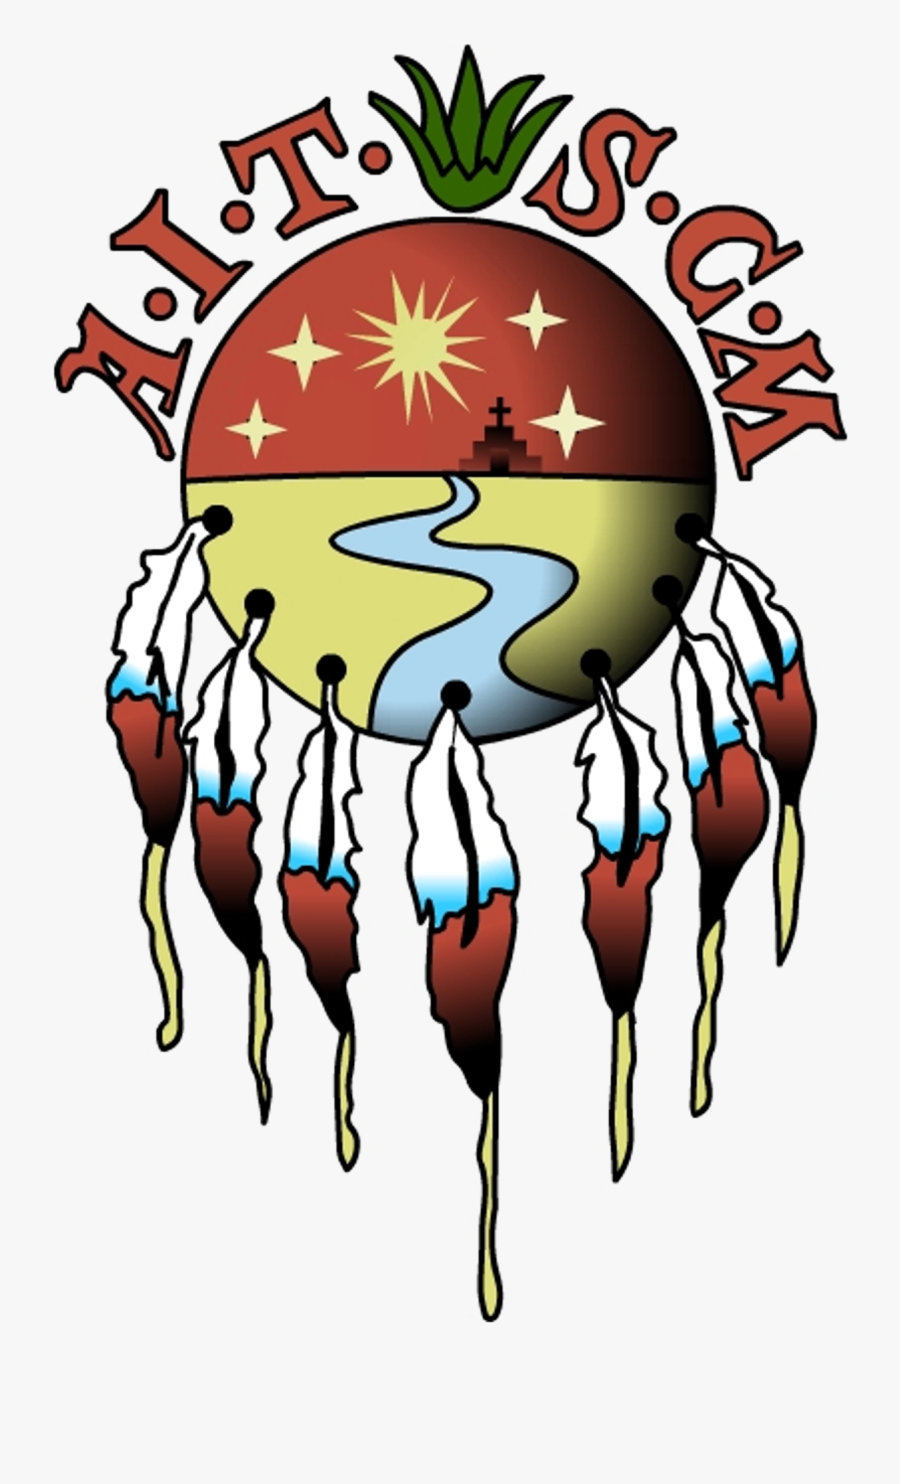 Ait-scm Logo Transparent - American Indians In Texas At Spanish Colonial Missions, Transparent Clipart